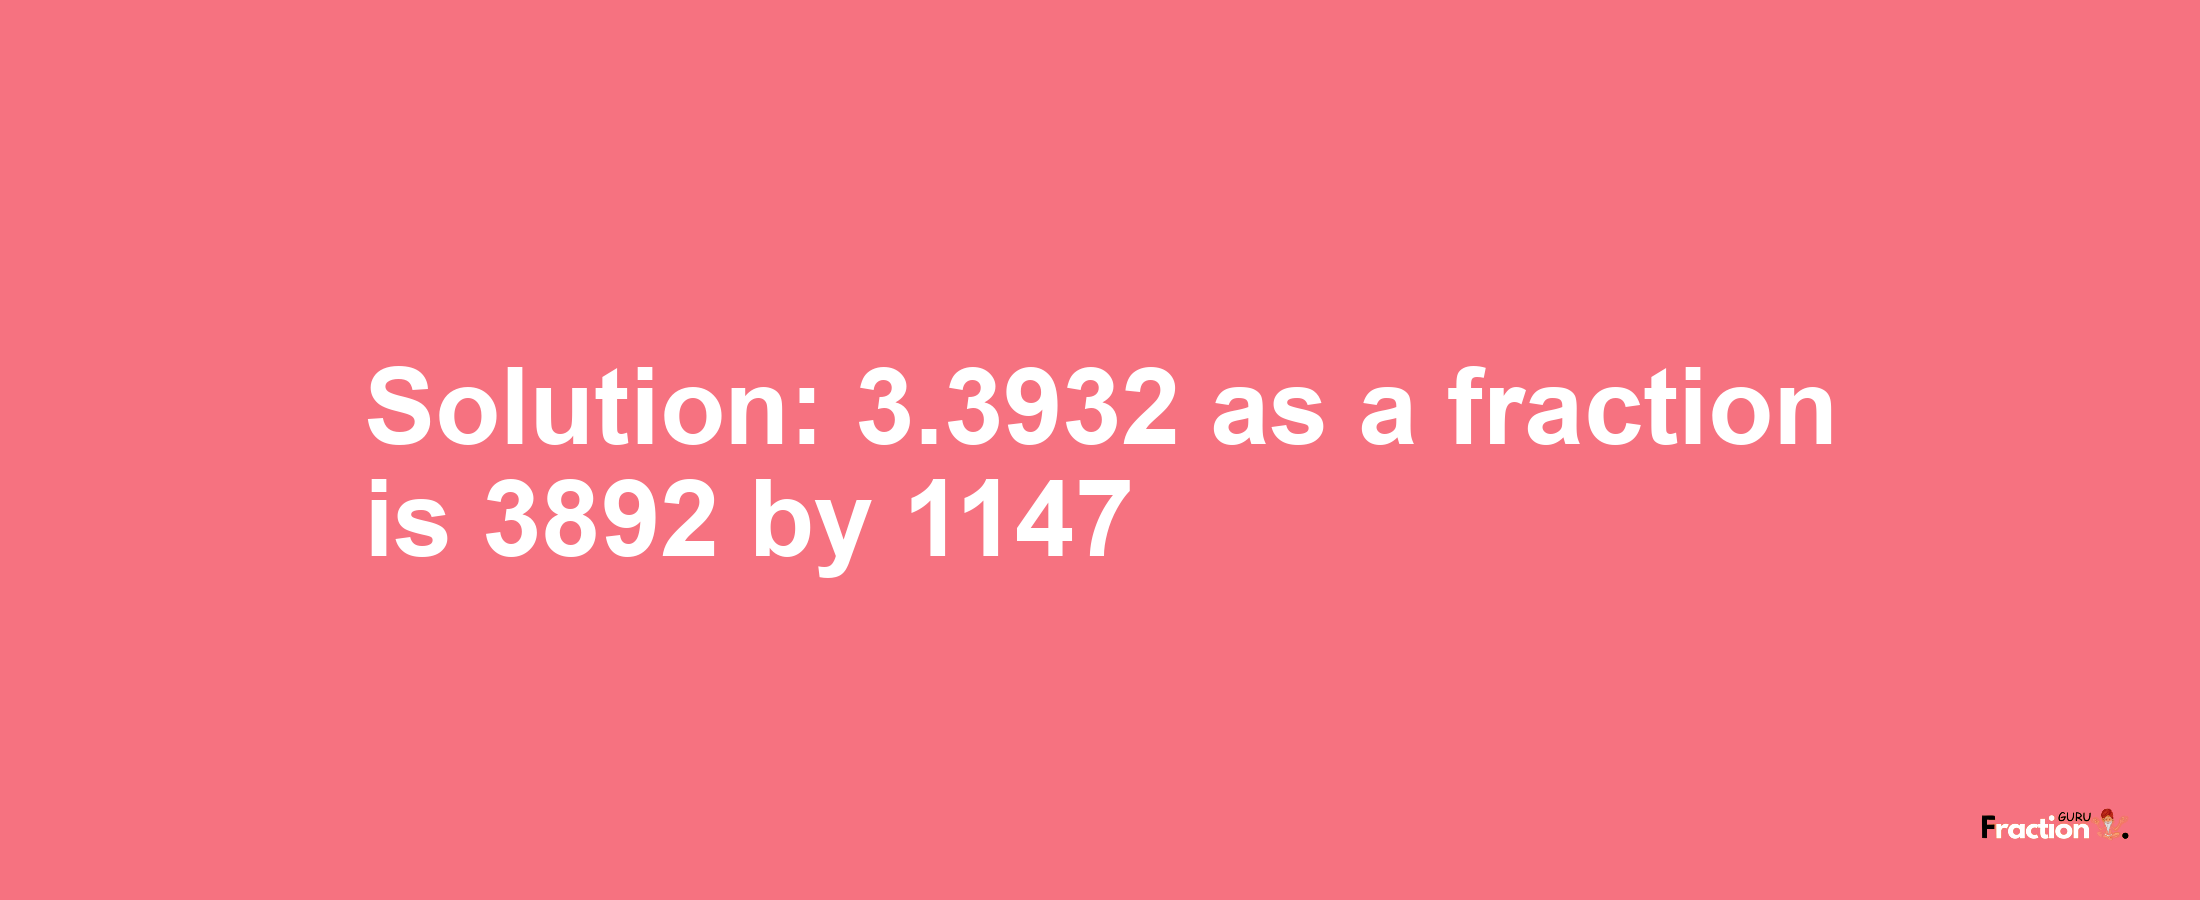 Solution:3.3932 as a fraction is 3892/1147